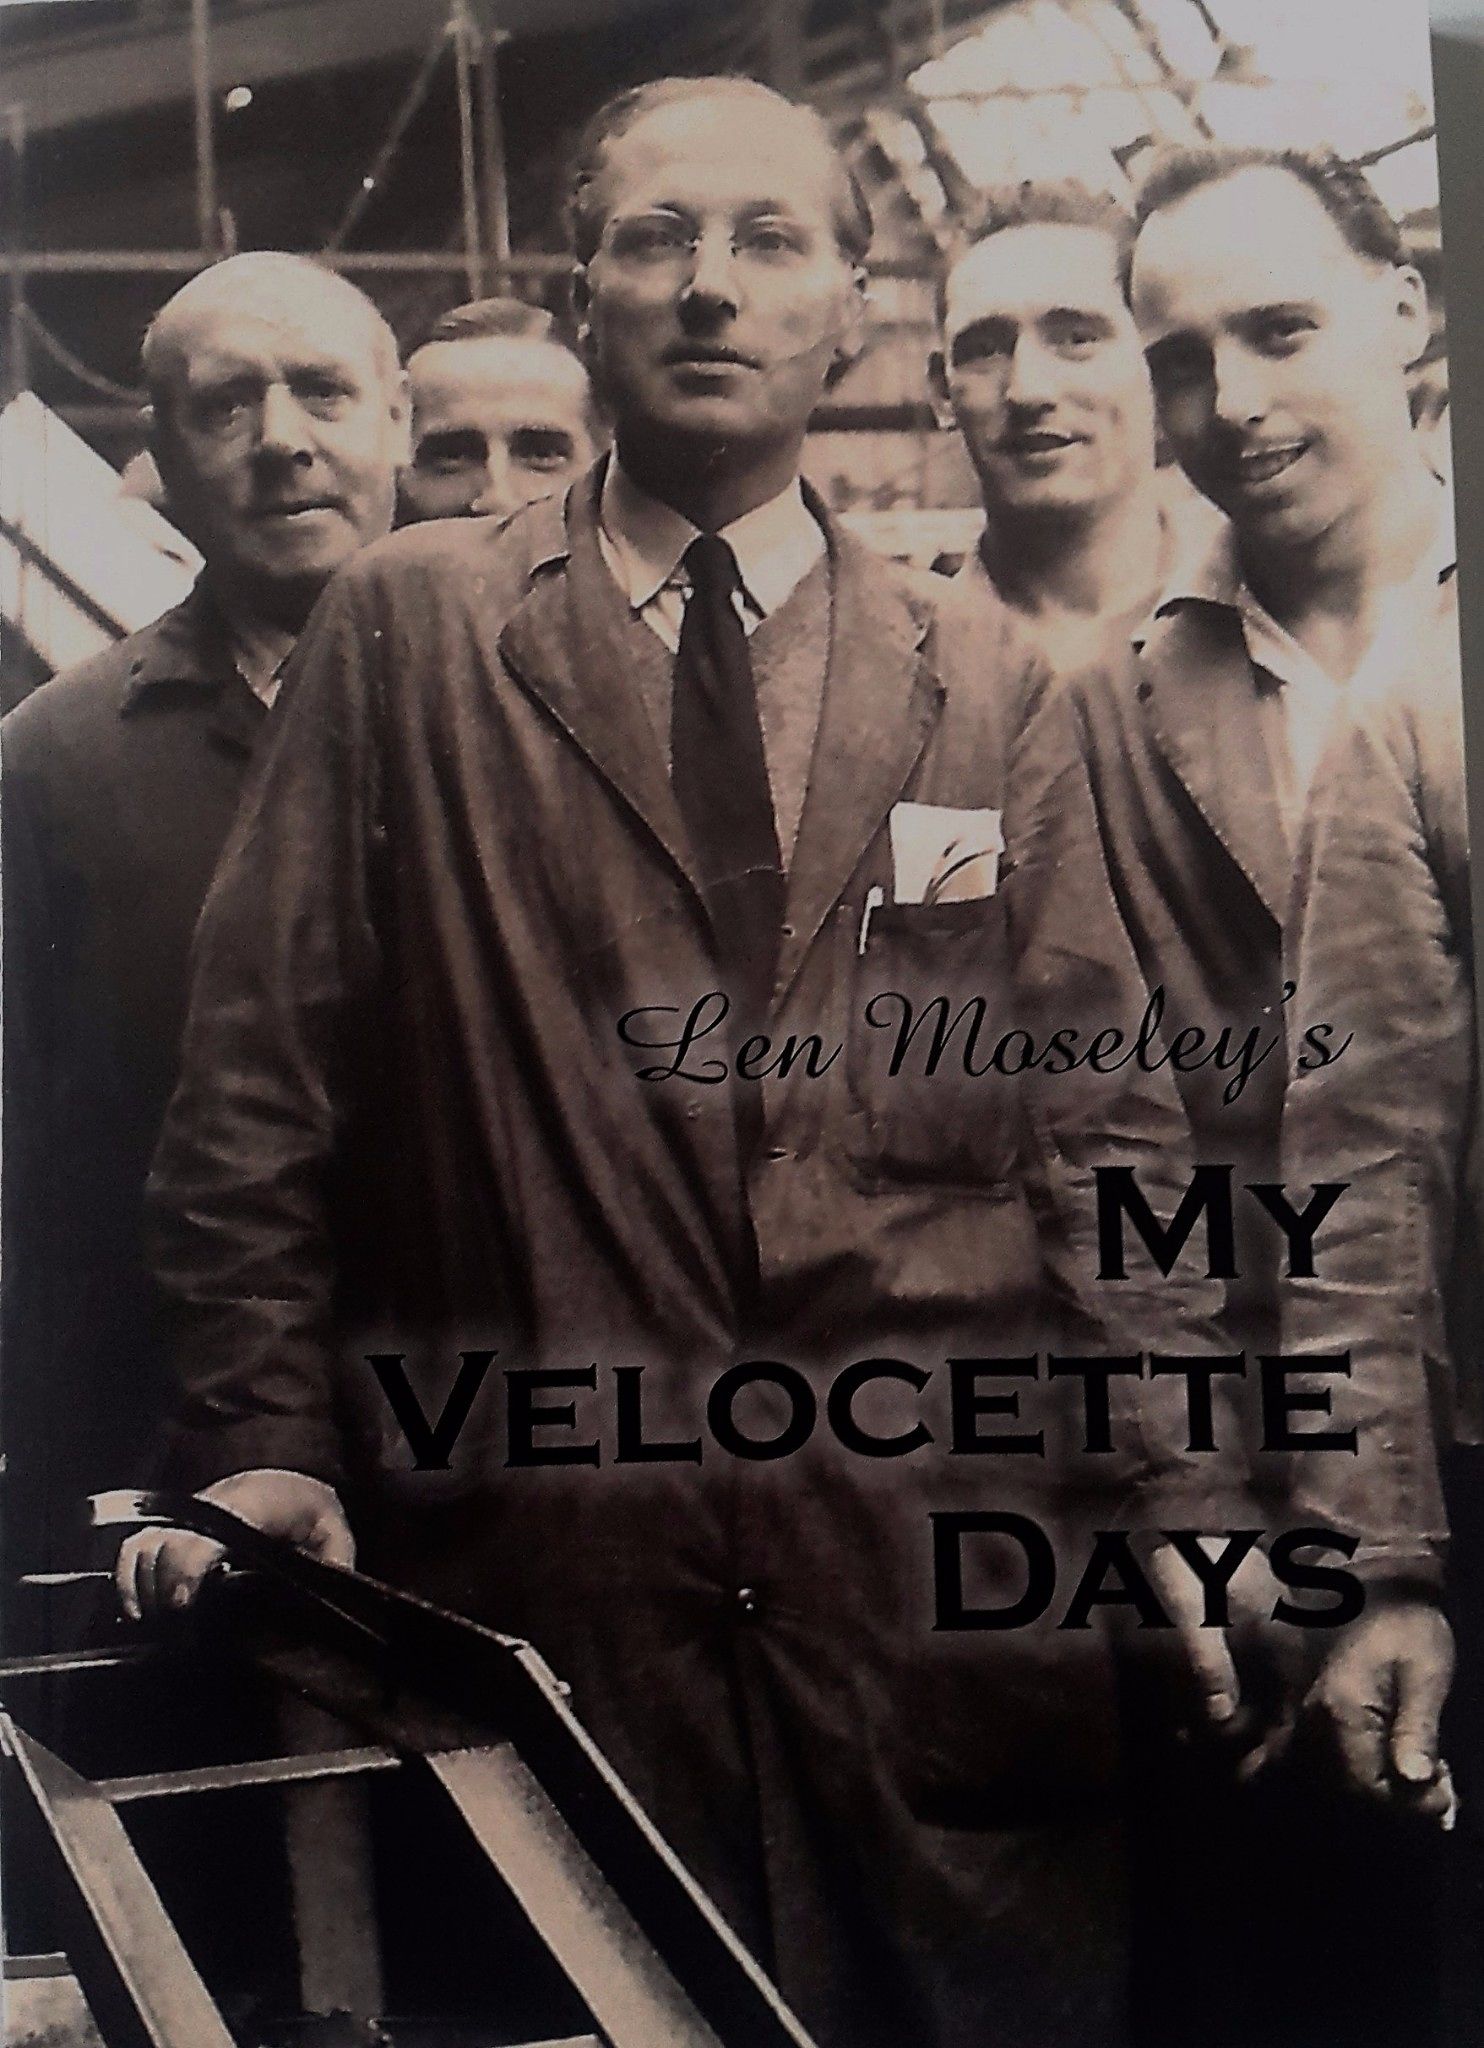 My Velocette Days by Len Moseley